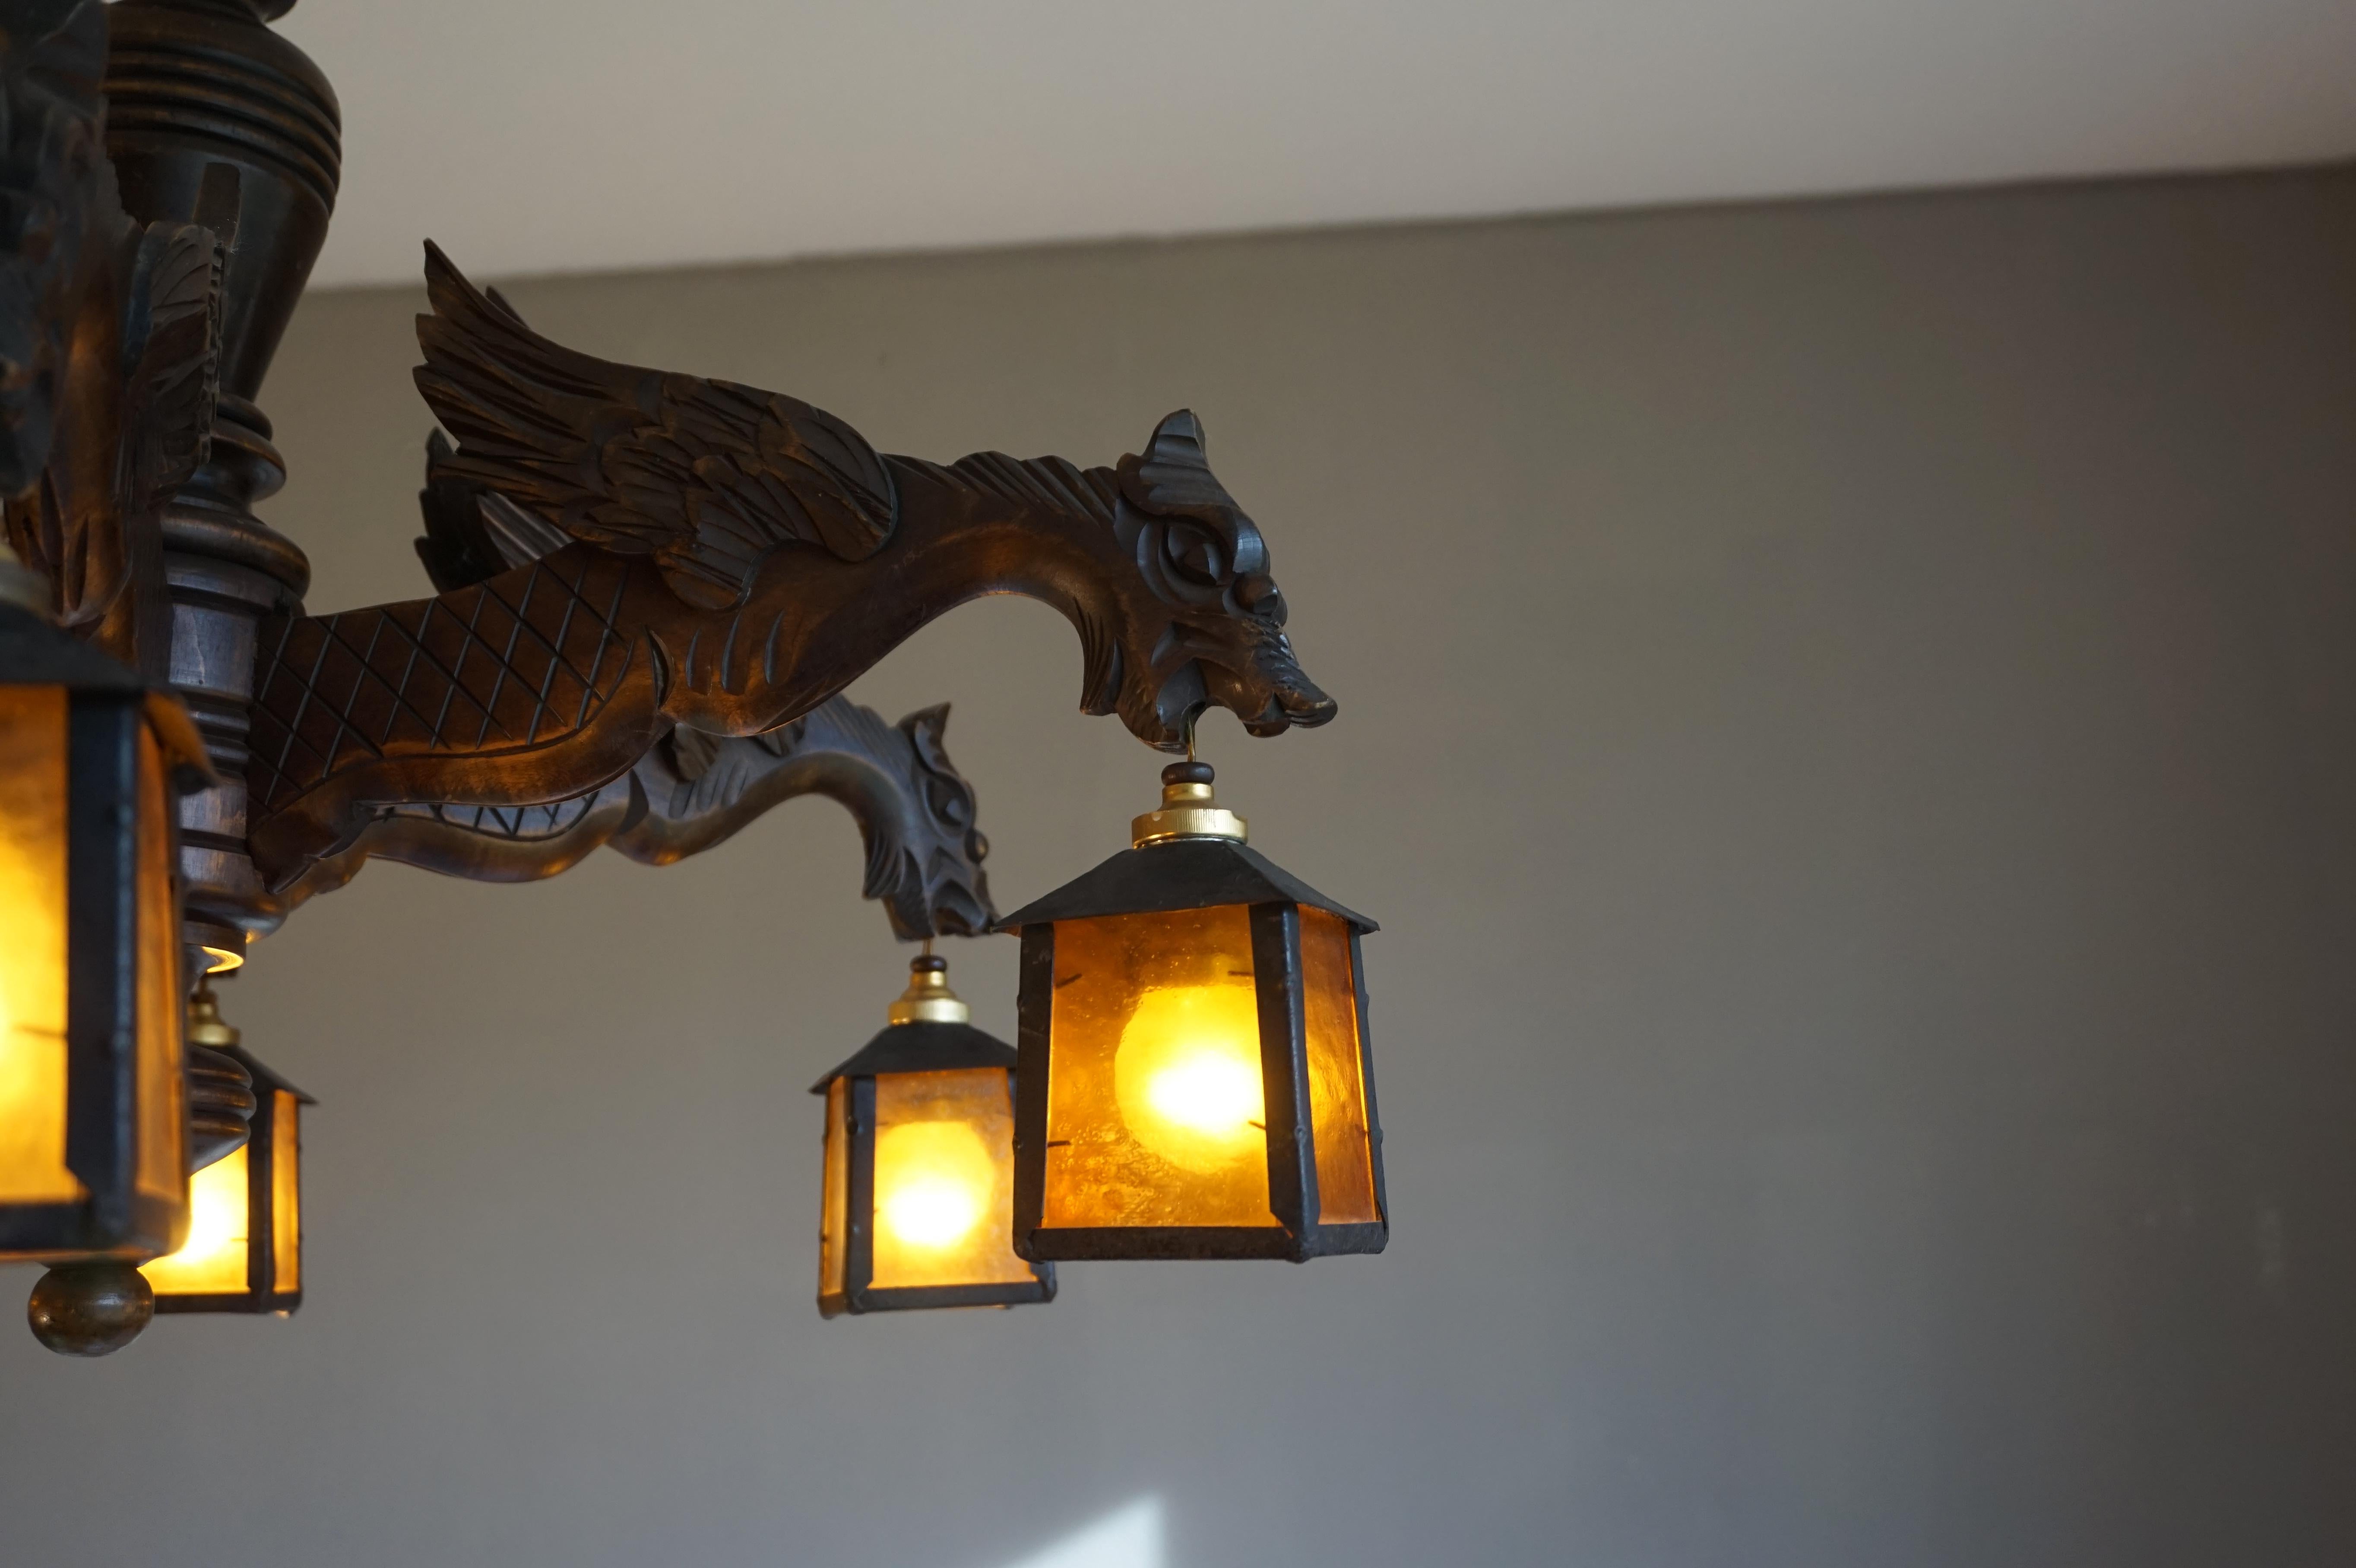 Hand Carved Chandelier in Medieval Gothic Style, Six Dragons Holding Lanterns 3